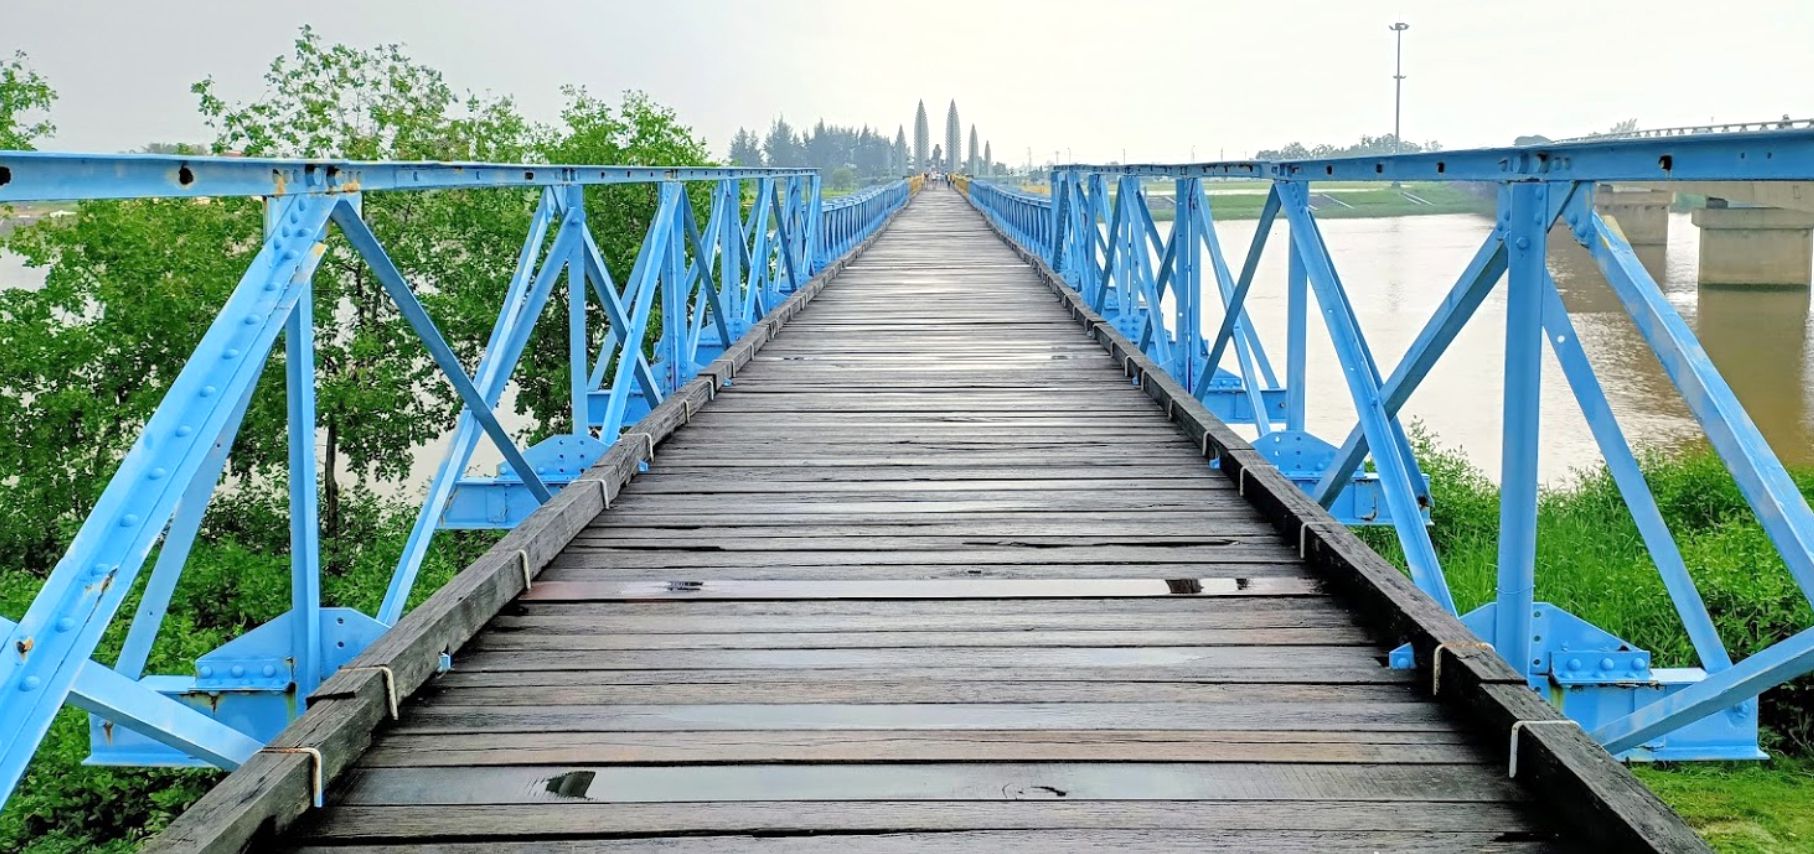 In 2001, Hien Luong Bridge was restored to its original design according to the design of the old bridge